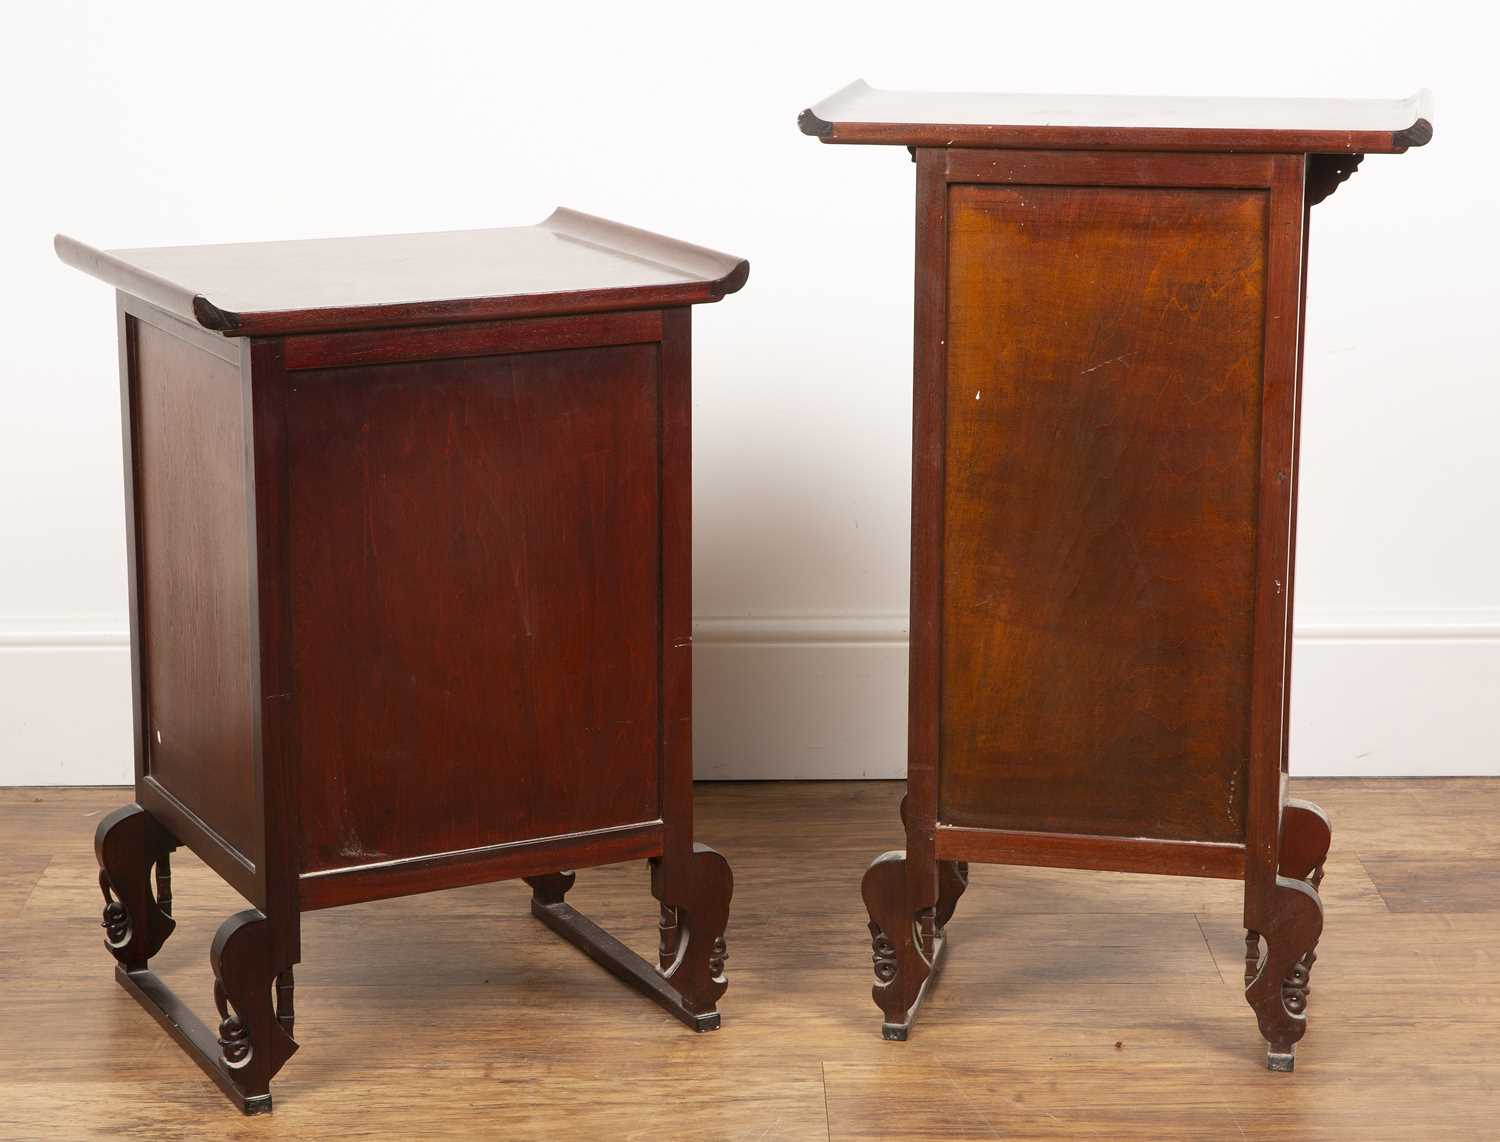 Two small sets of drawers Chinese, one 47cm wide x 75cm high x 25cm deep and the other 44.5cm wide x - Image 4 of 6